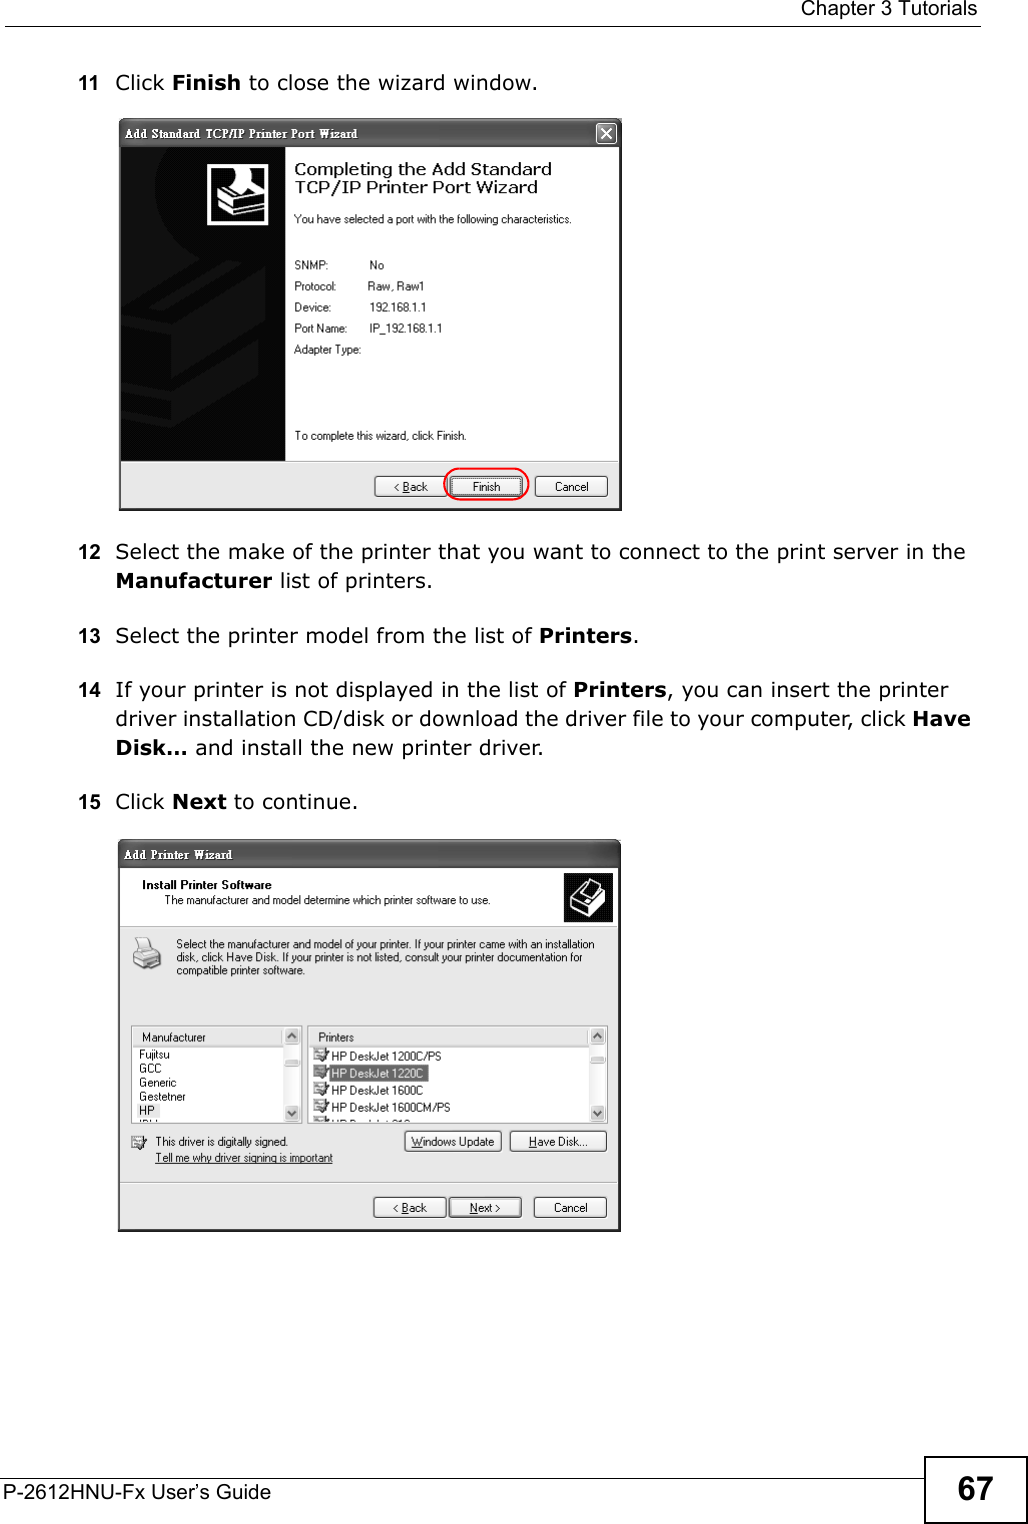  Chapter 3 TutorialsP-2612HNU-Fx User’s Guide 6711 Click Finish to close the wizard window.Tutorial: Finish Adding the TCP/IP Port12 Select the make of the printer that you want to connect to the print server in the Manufacturer list of printers.13 Select the printer model from the list of Printers.      14 If your printer is not displayed in the list of Printers, you can insert the printer driver installation CD/disk or download the driver file to your computer, click Have Disk… and install the new printer driver. 15 Click Next to continue.Tutorial: Add Printer Wizard: Printer Driv er